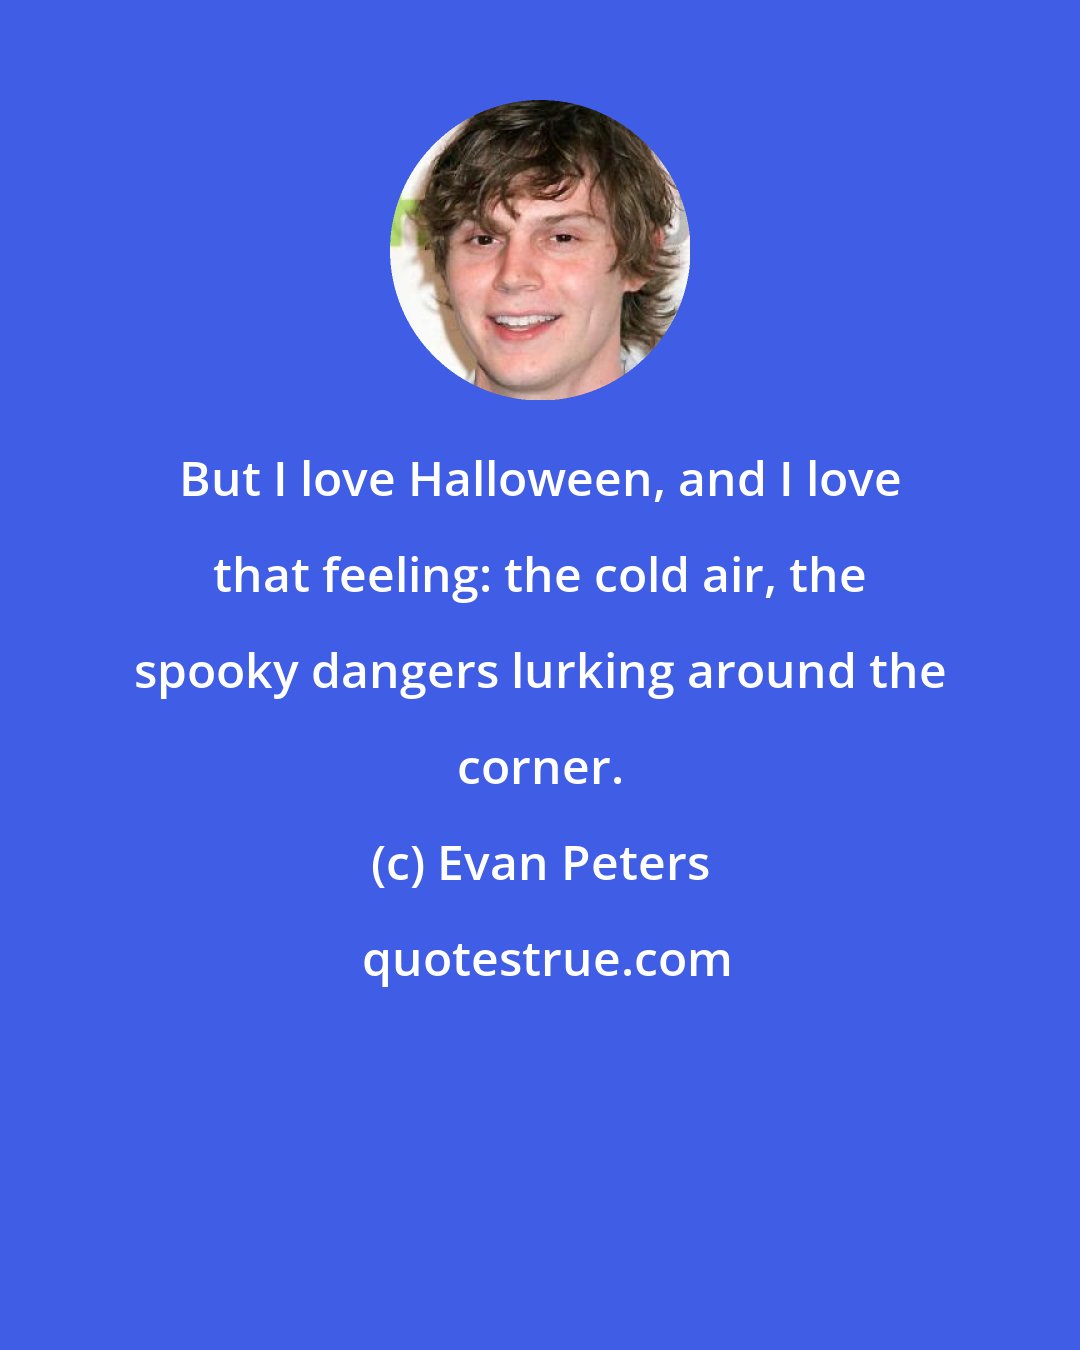 Evan Peters: But I love Halloween, and I love that feeling: the cold air, the spooky dangers lurking around the corner.